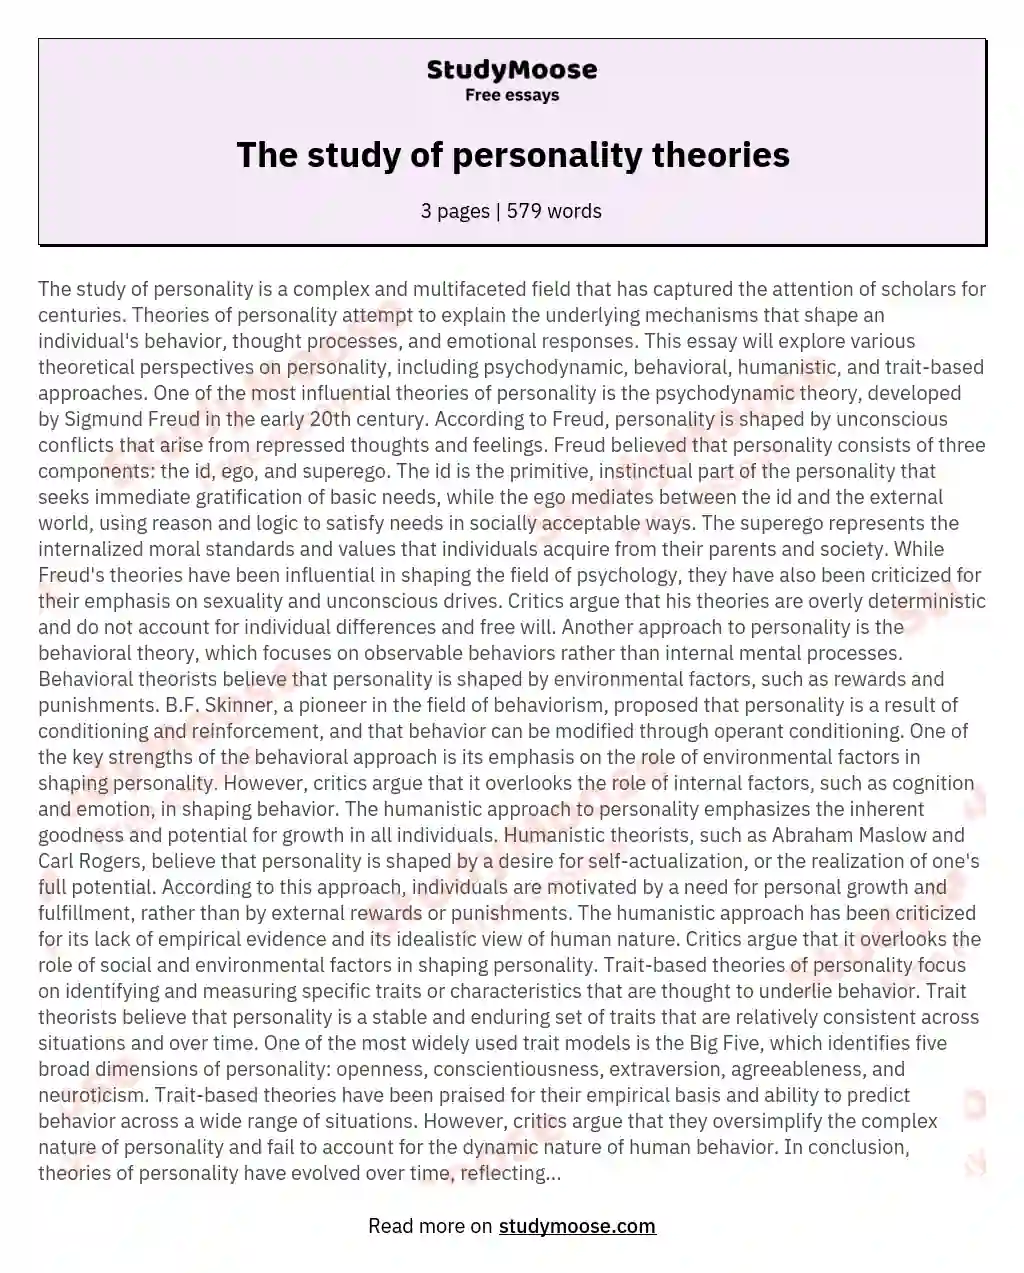 The study of personality theories essay